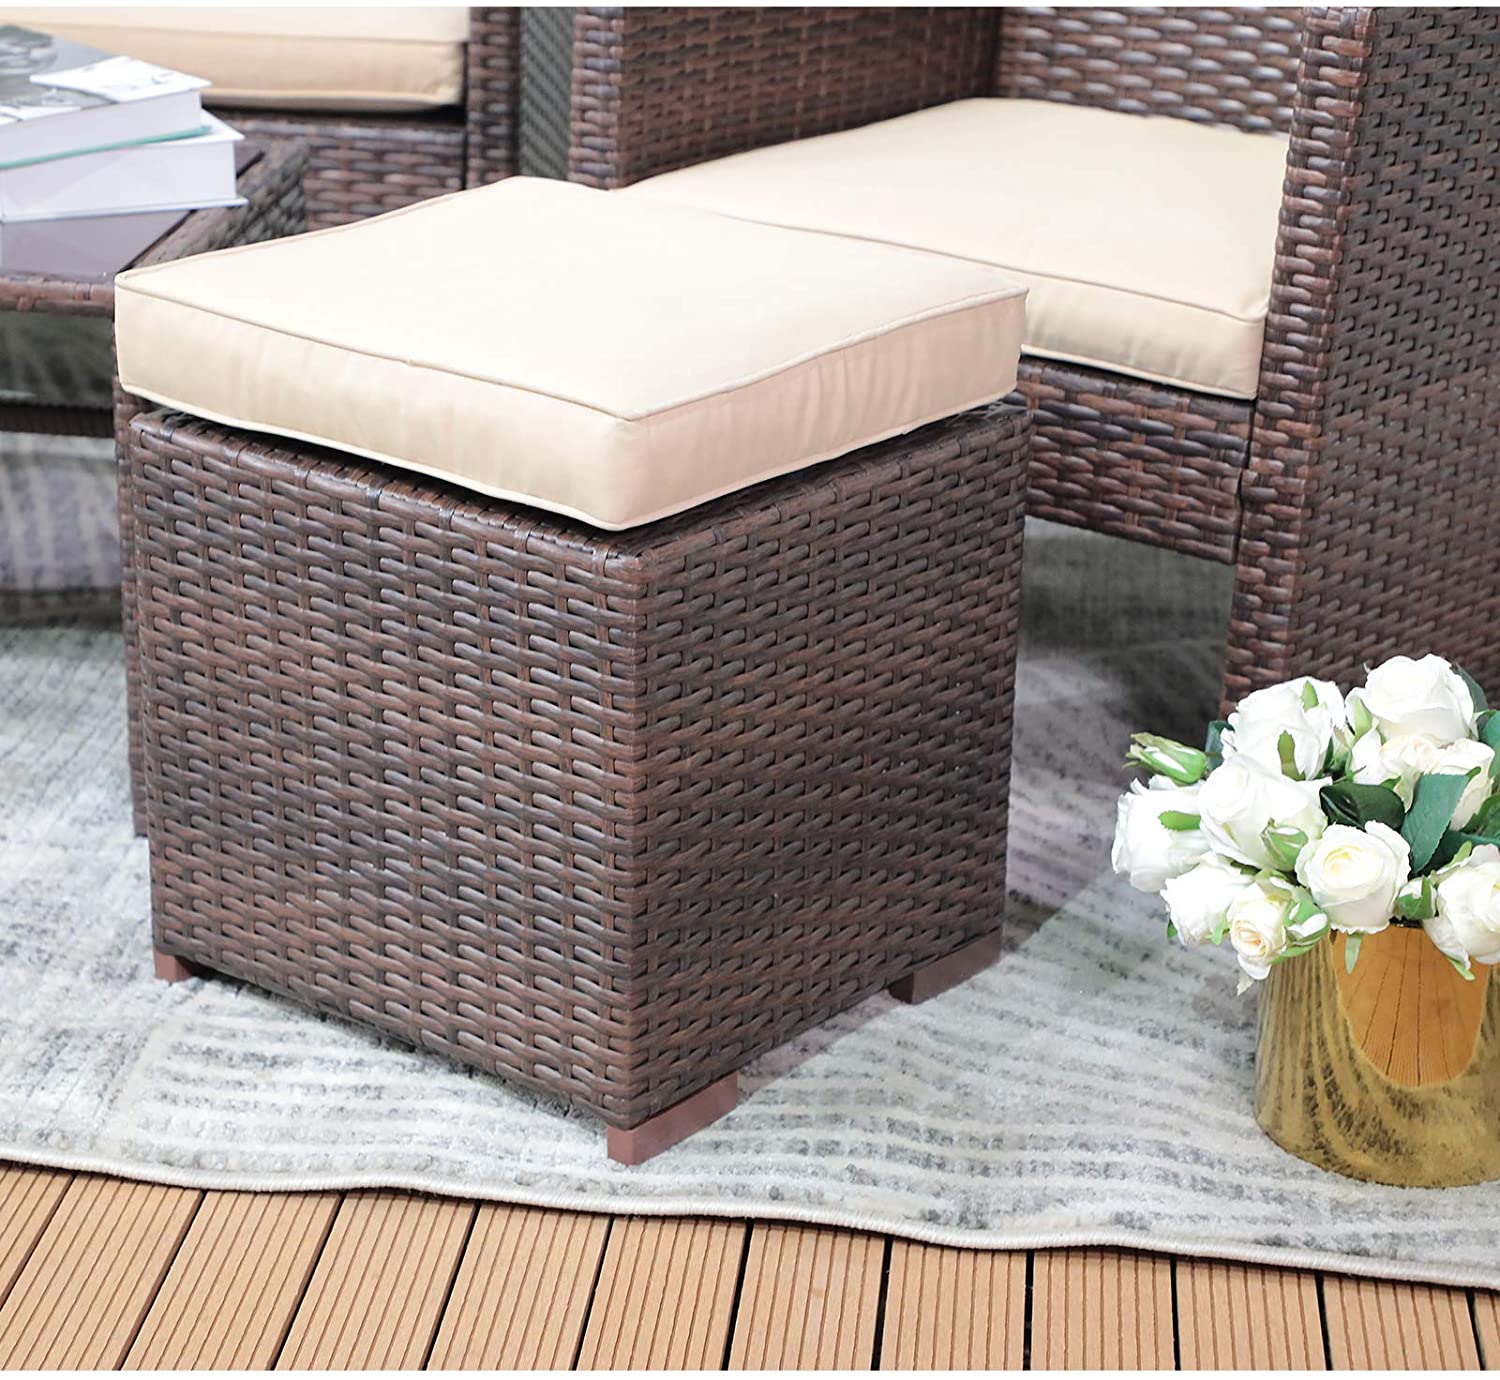 No Assembly Required Indoor Outdoor All-Weather Dark Brown Wicker Rattan Outdoor Footstool Footrest Seat with Beige Cushions Patiorama 2 Pieces Assembled Outdoor Patio Ottoman